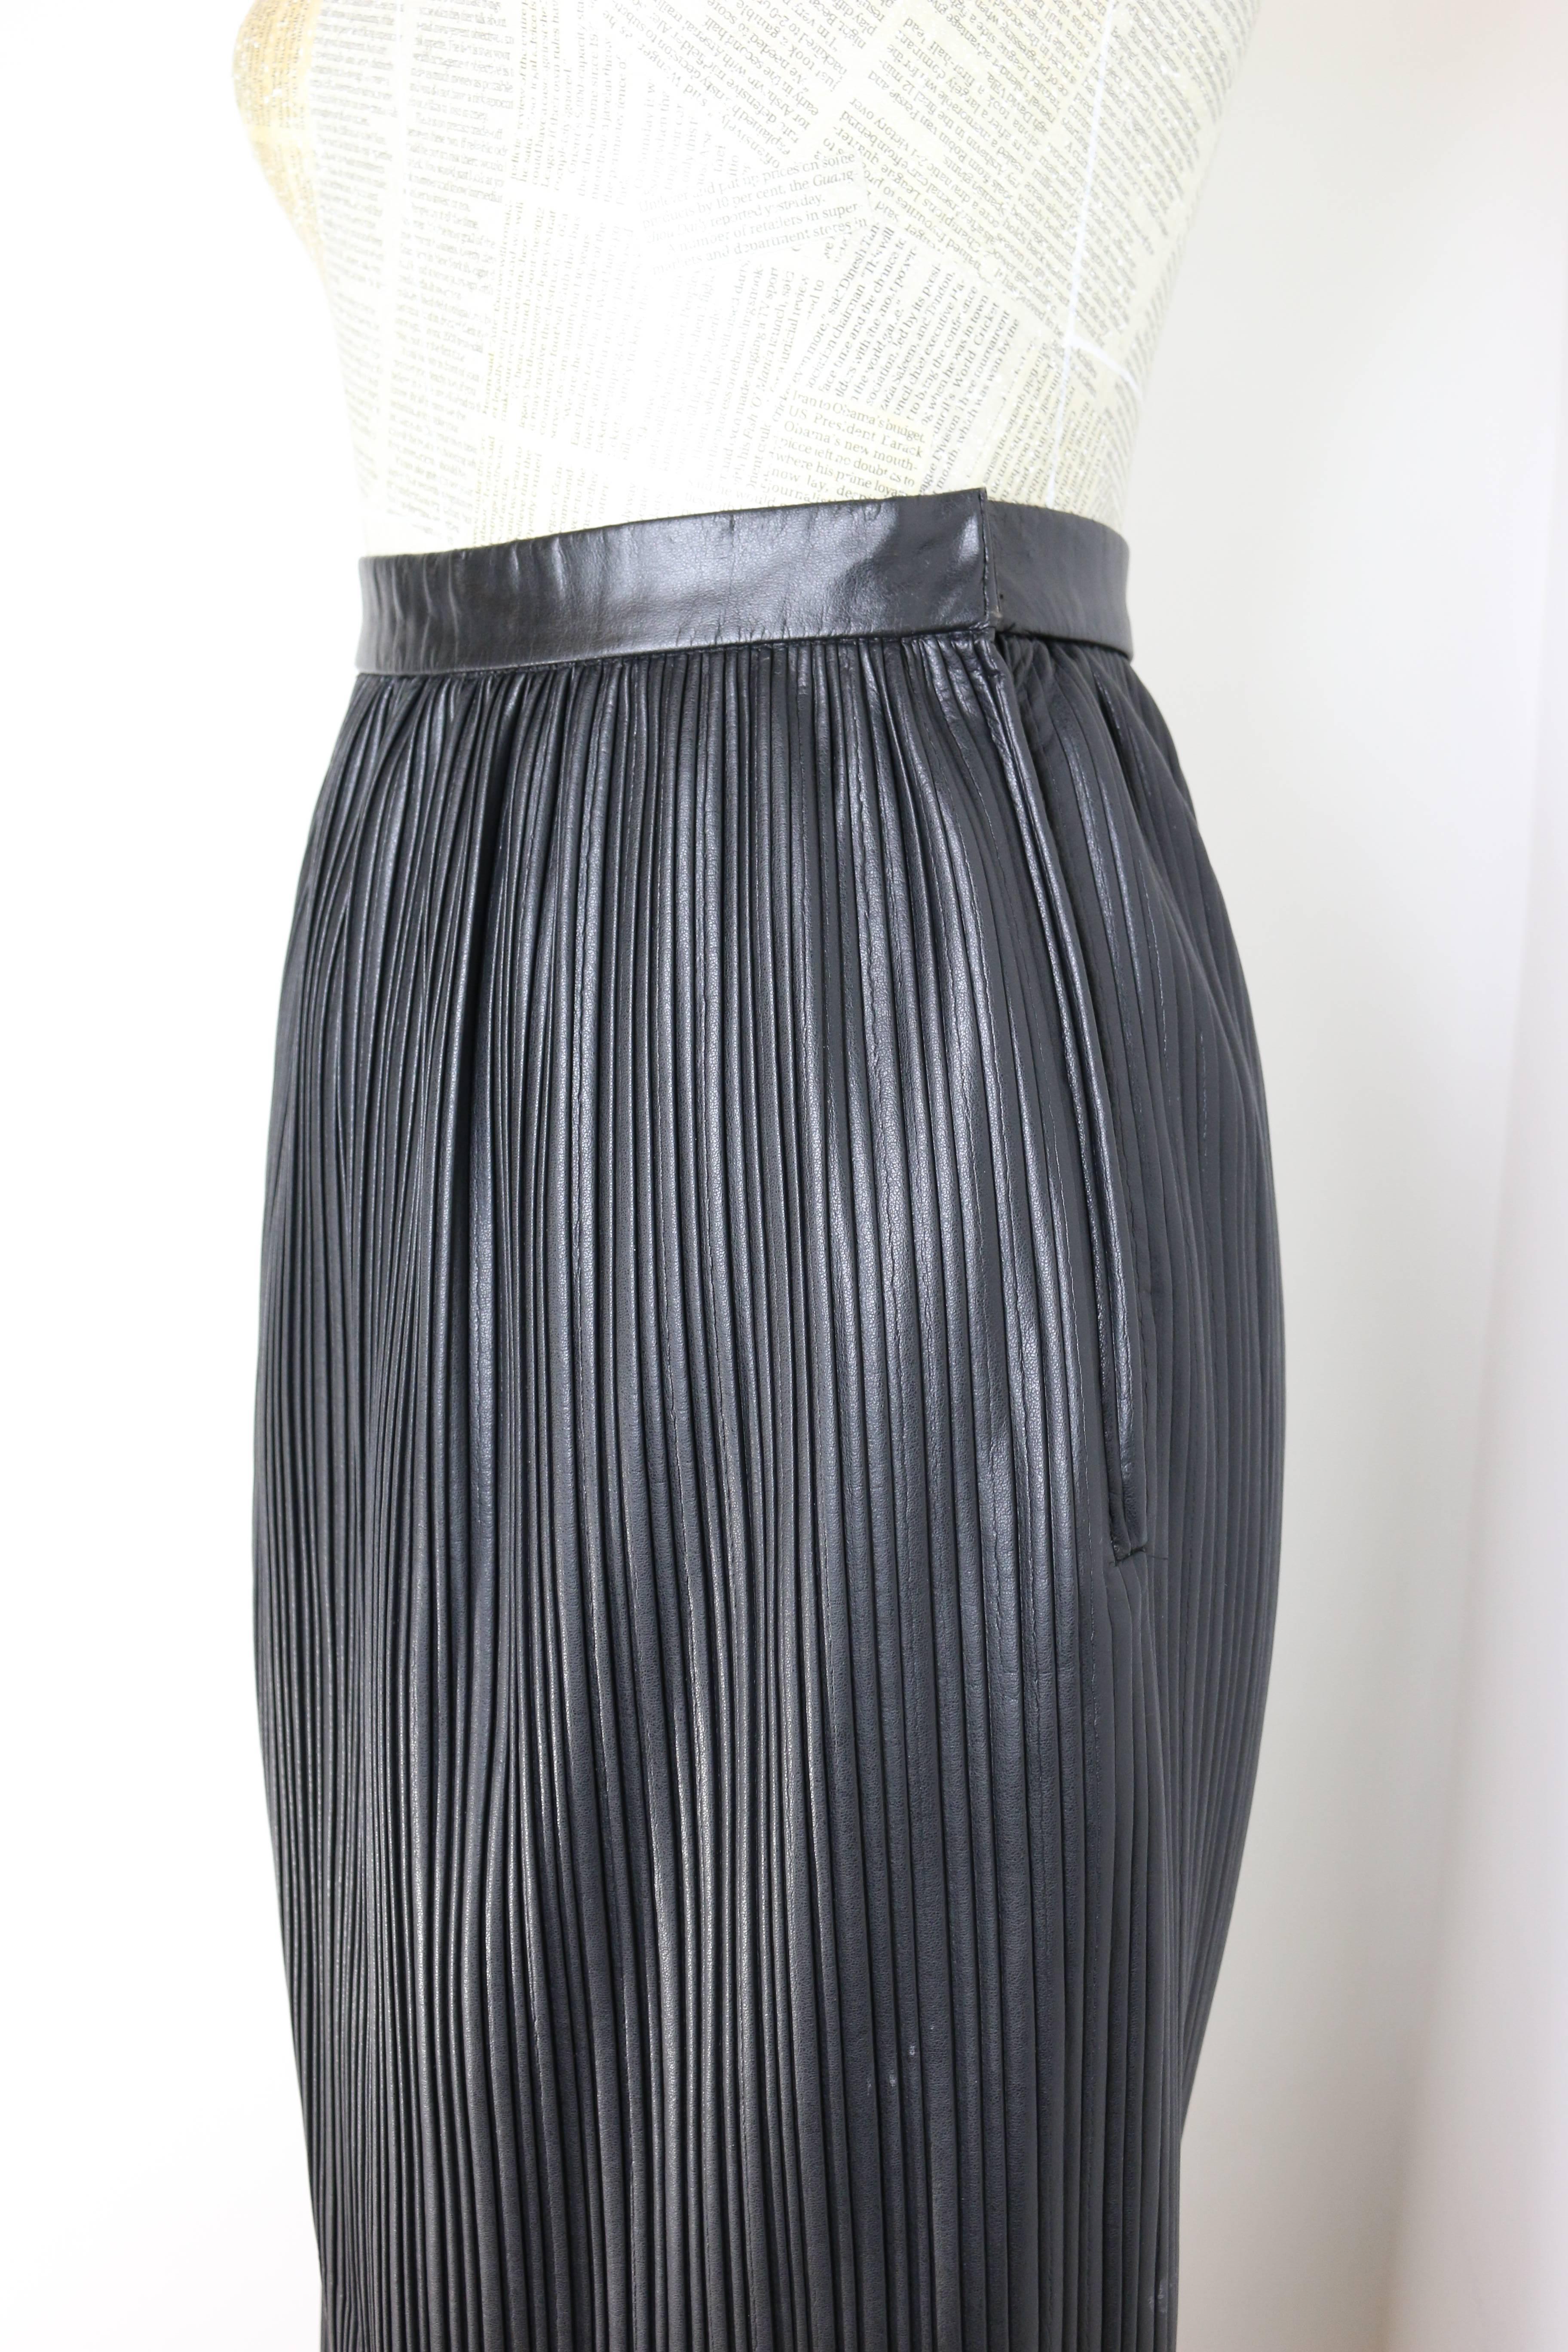 - Vintage 90s Japanese designer Deco Sugai black leather long pleated skirt. This leather pleated skirt is very unique and rare. 

- It goes with anything from a t-shirt to a shirt, a blouse or a jacket!

- Size 9 Japan. 

- Height: 98cm. Waist: